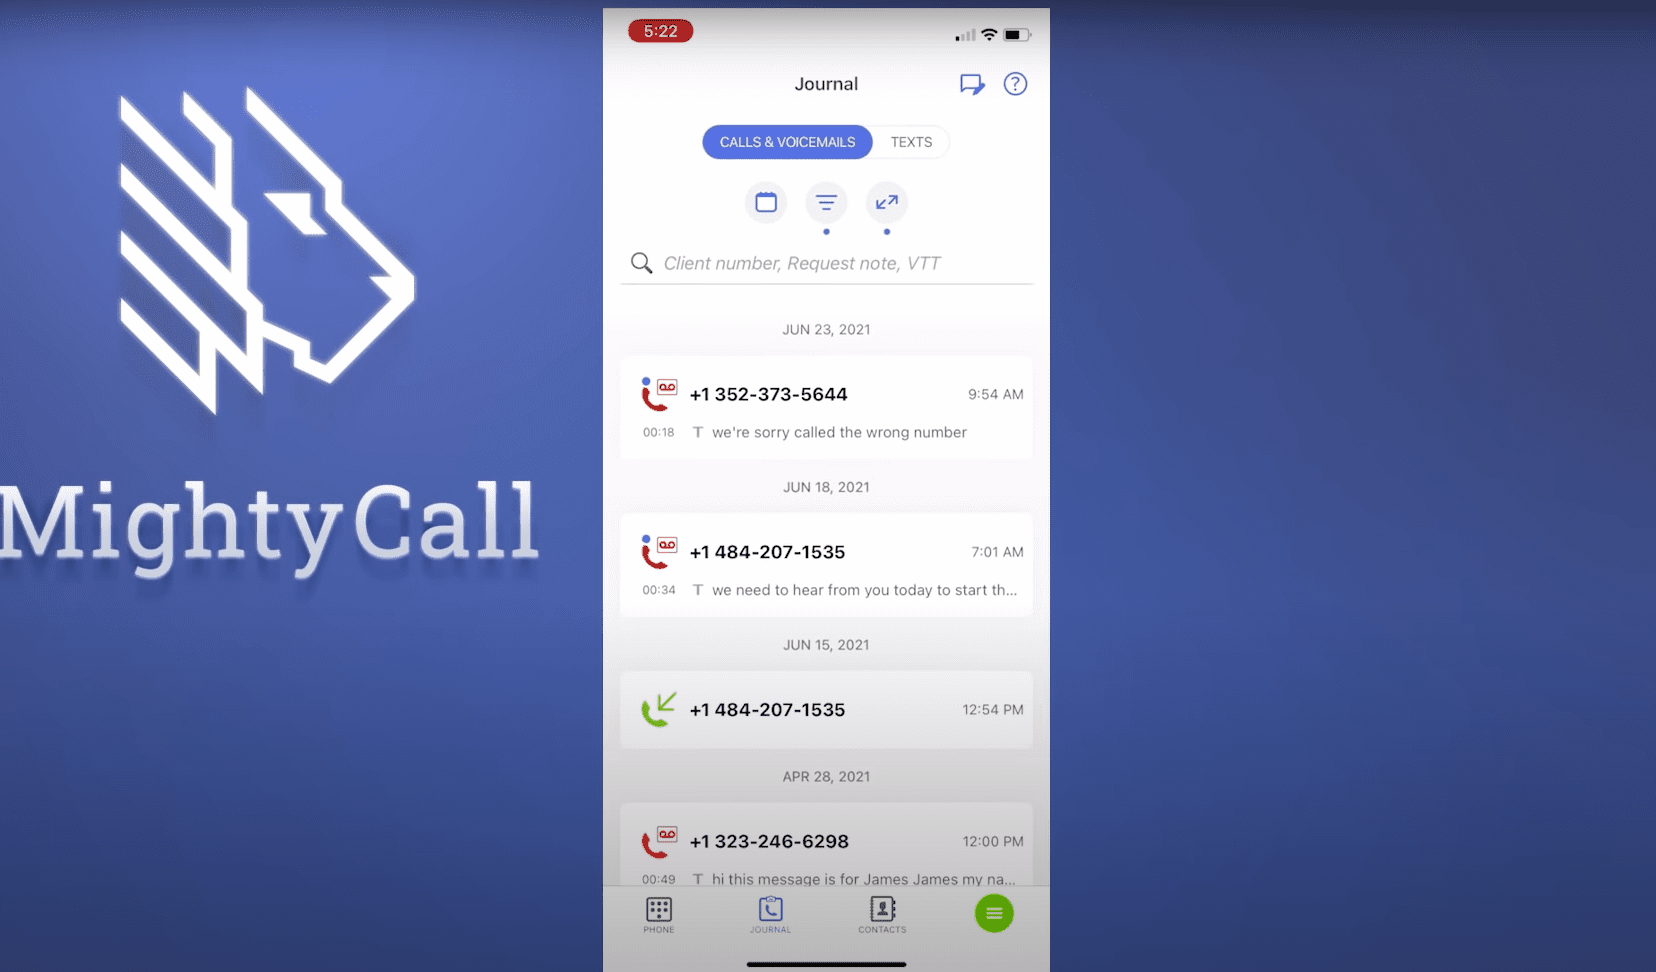 MightyCall Call Tracking Feature